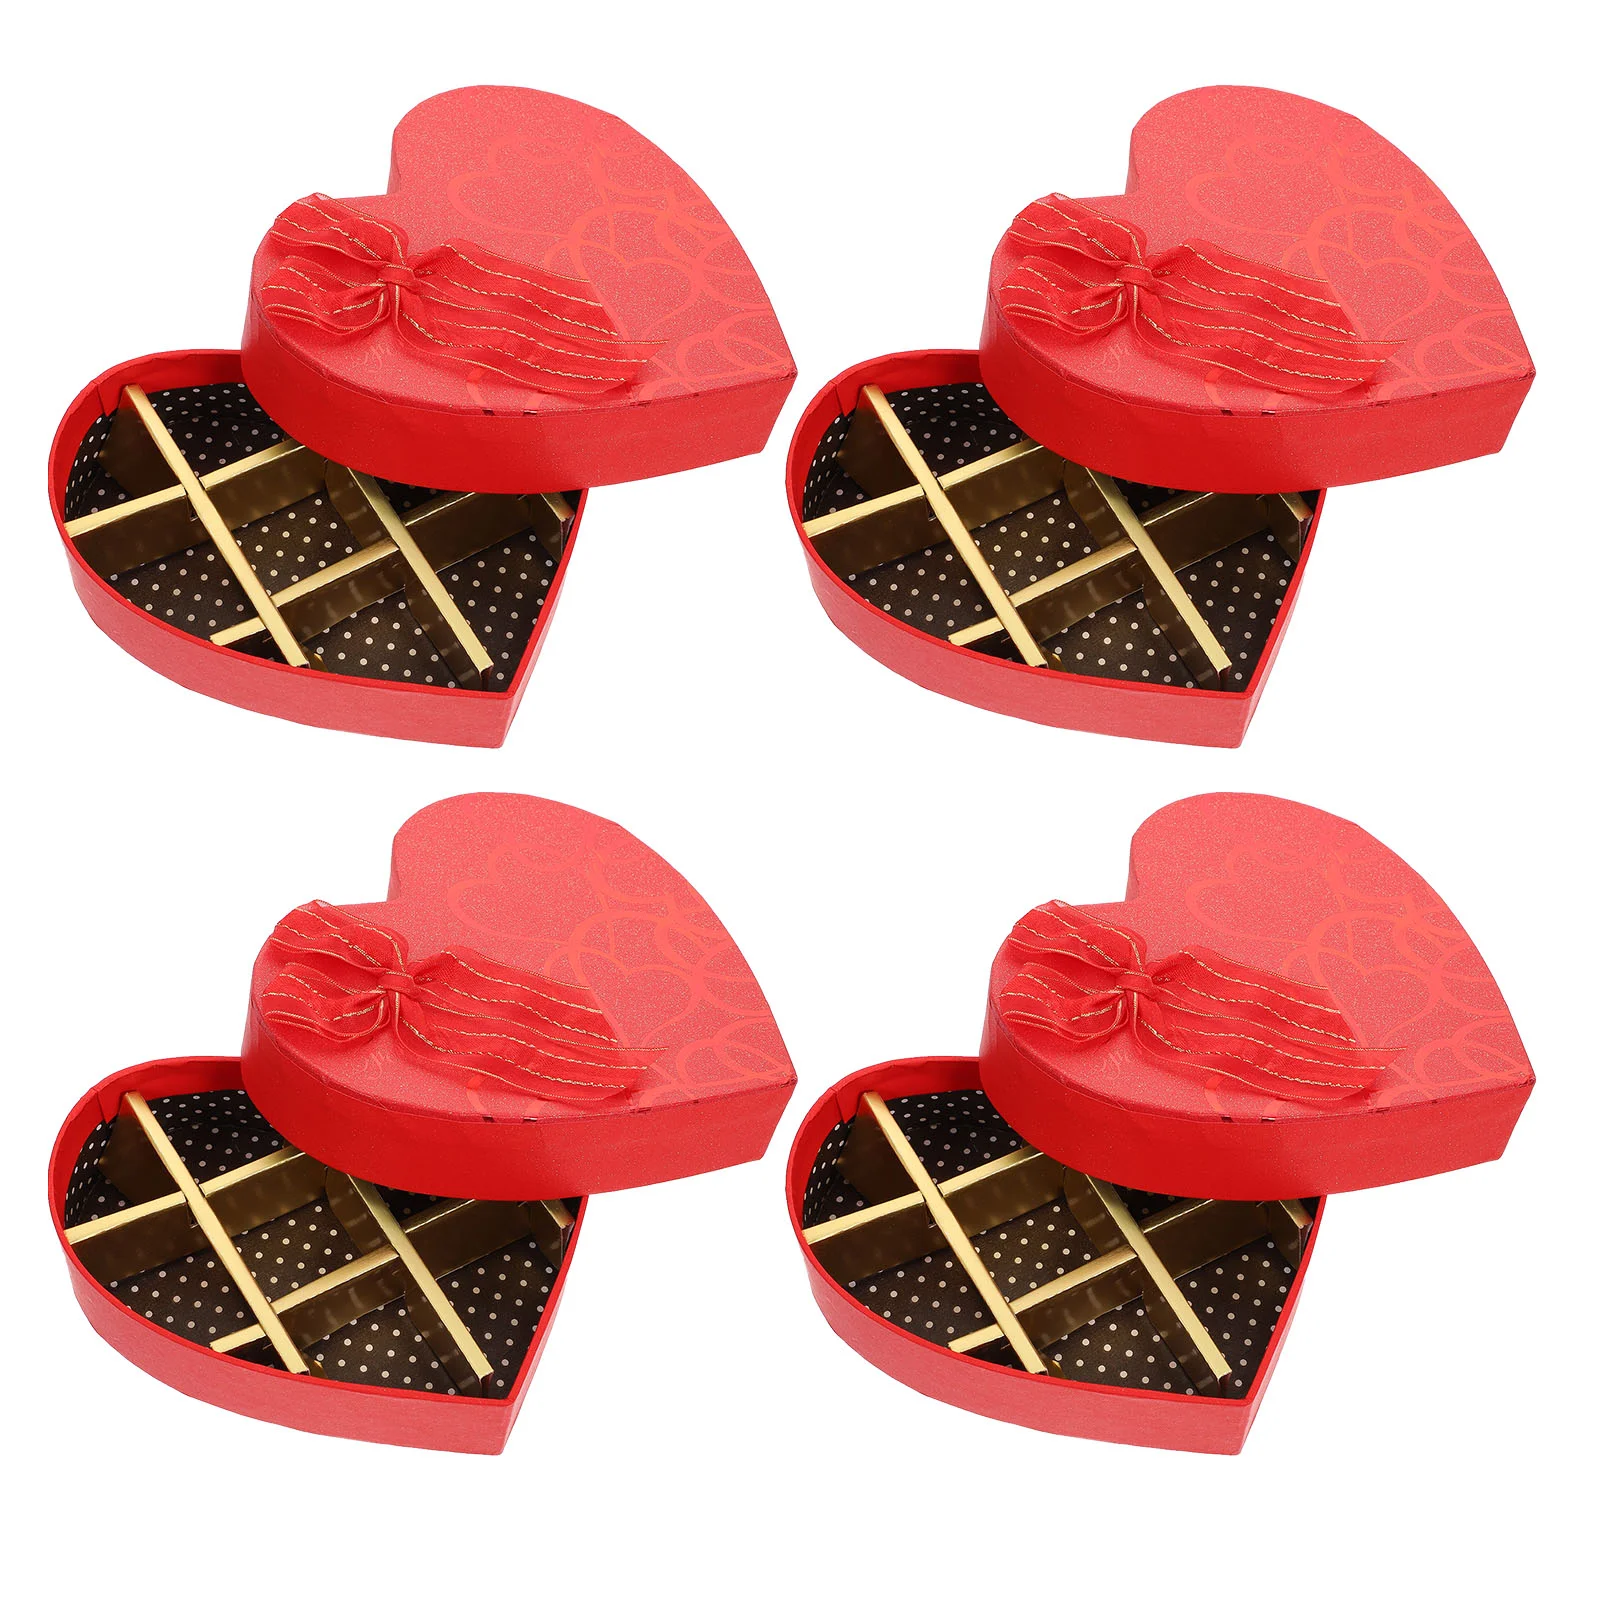 

4 Pcs Chocolate Box Boxes for Packing Orders Mini Food Containers Present Storage Jewelry